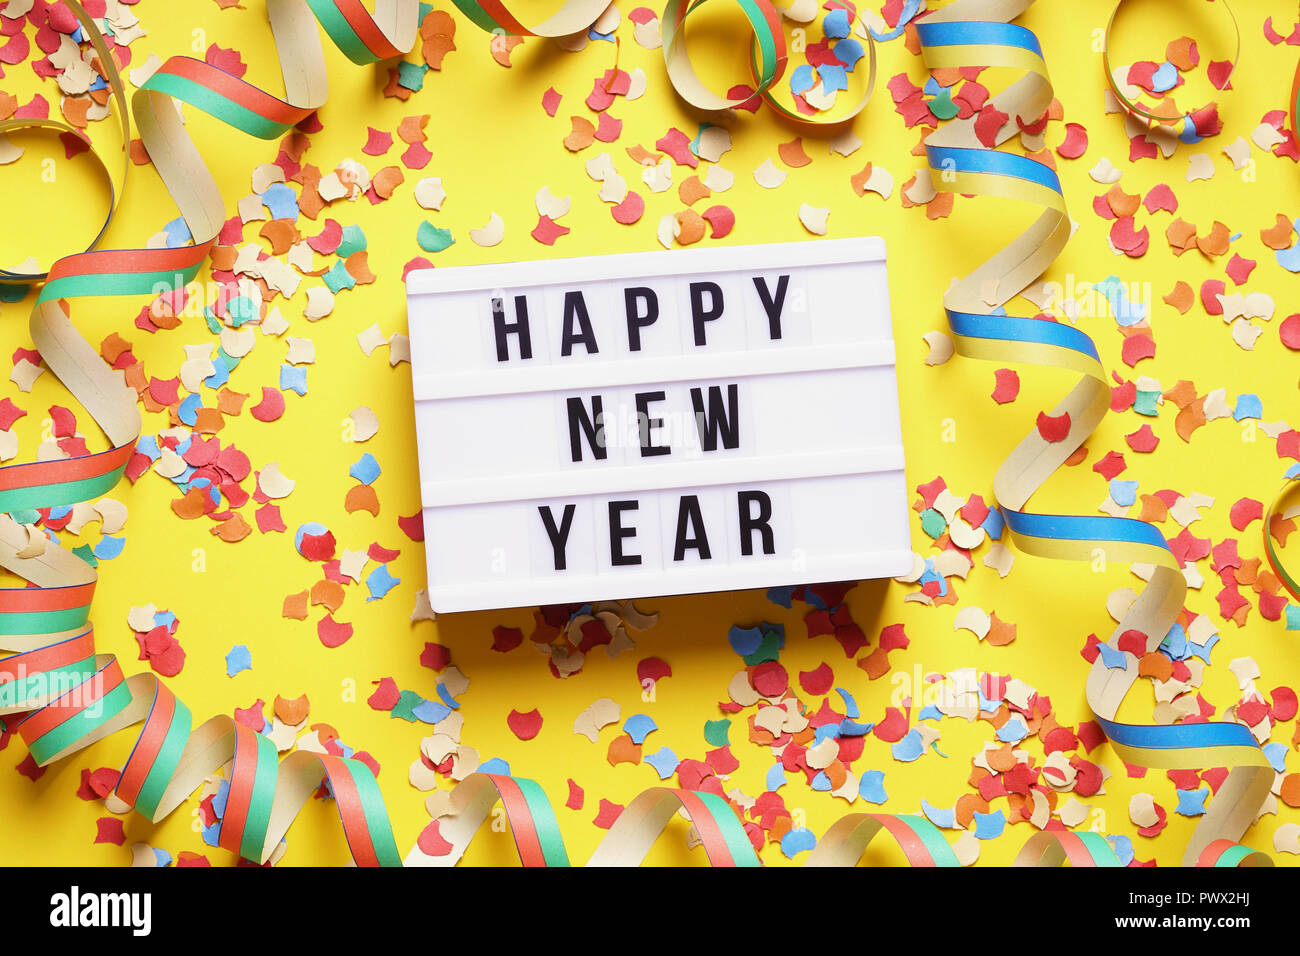 happy new year party celebration flat lay with confetti and streamers on yellow background Stock Photo